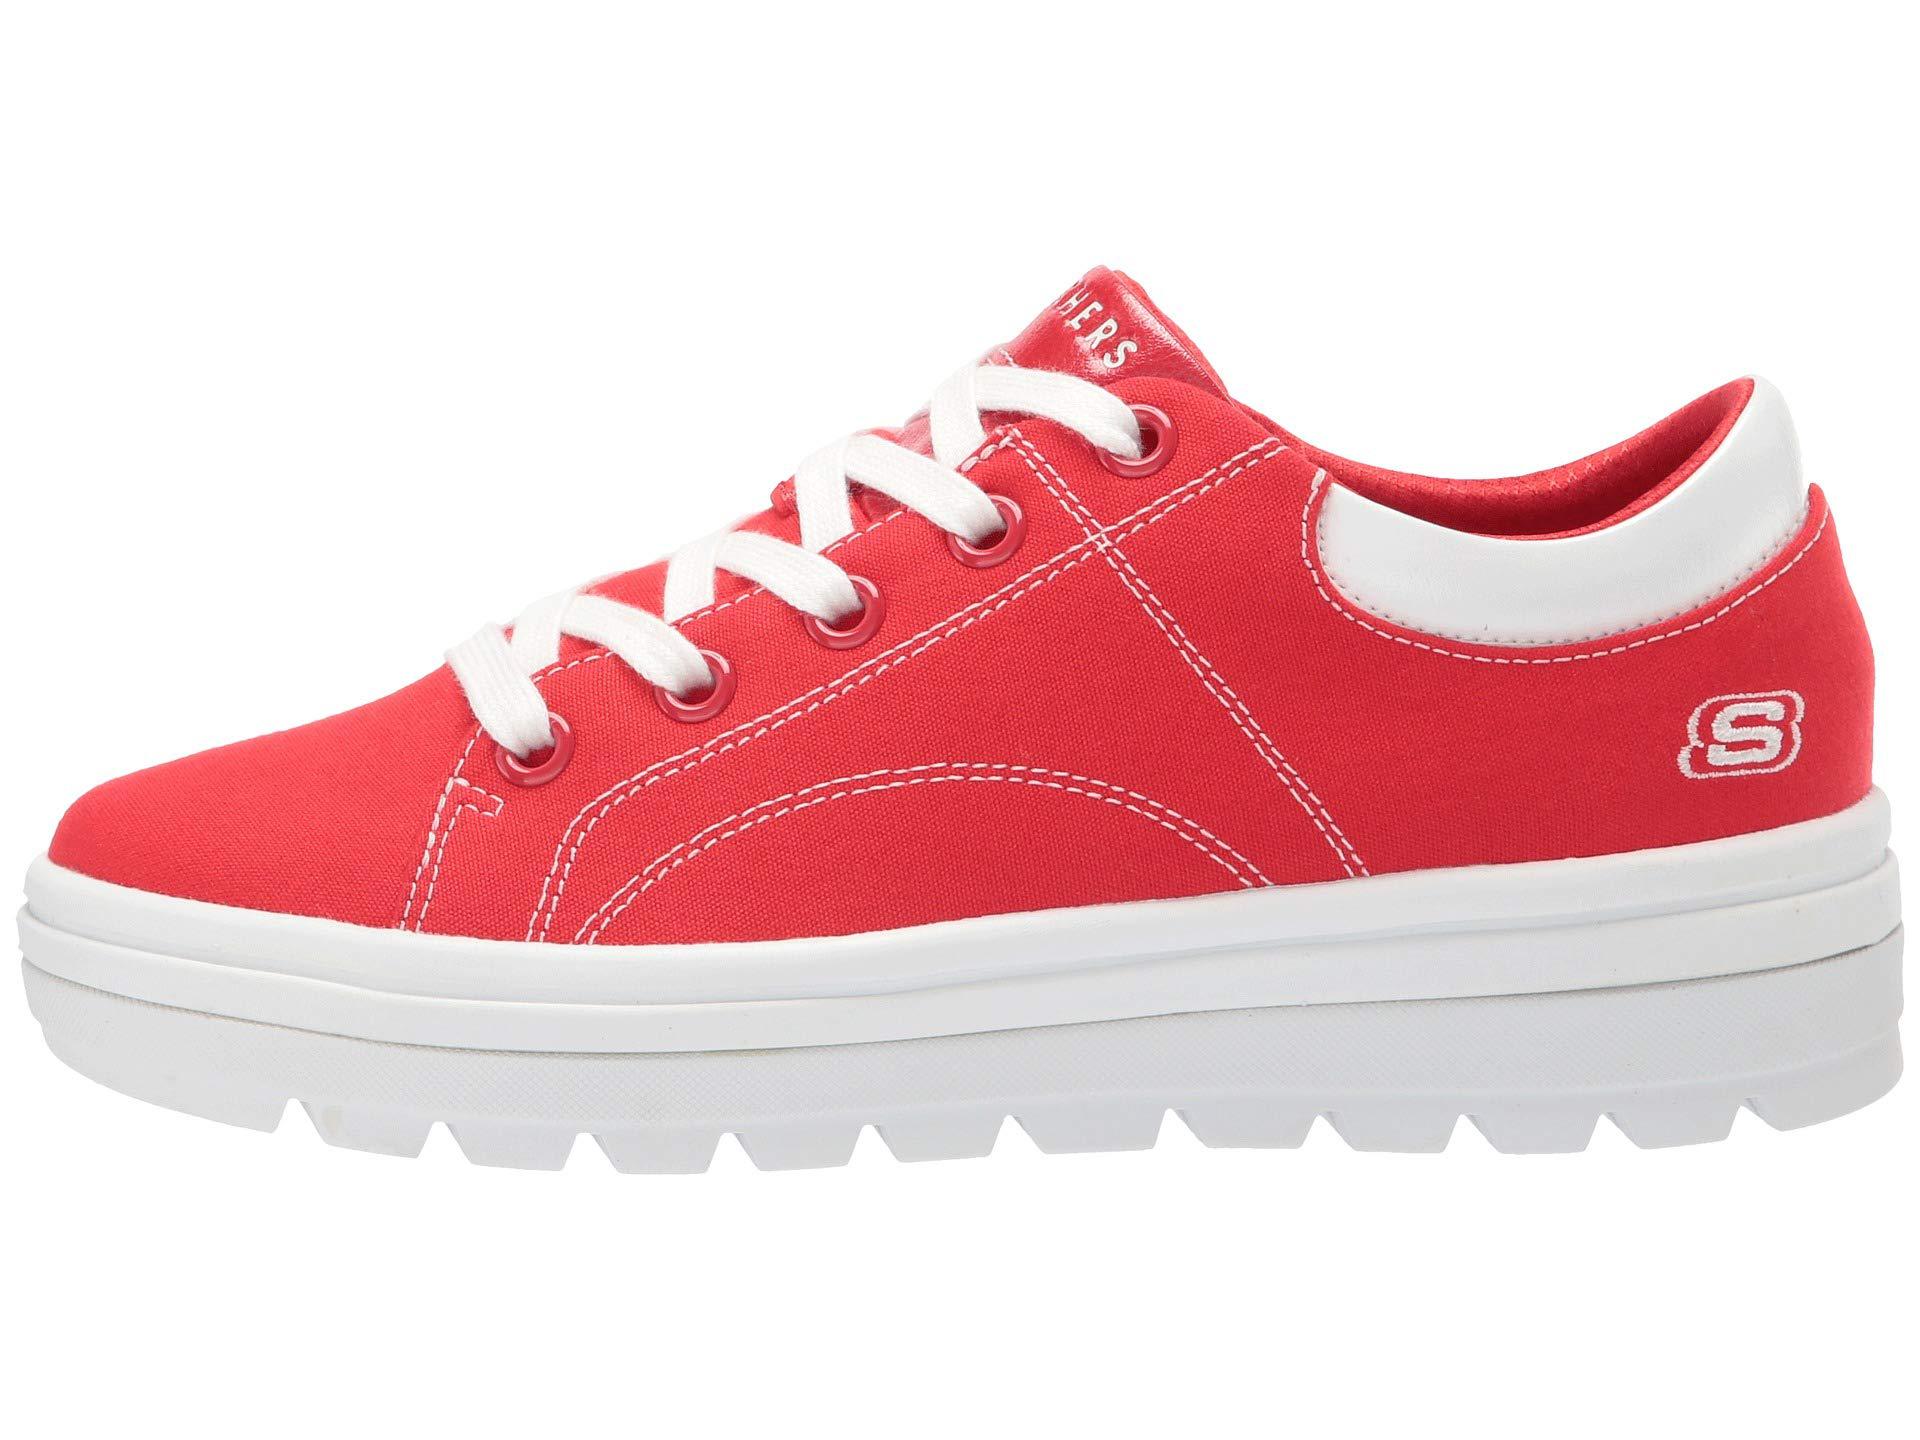 Skechers Street Cleat-bring It Back Trainers in Red - Lyst